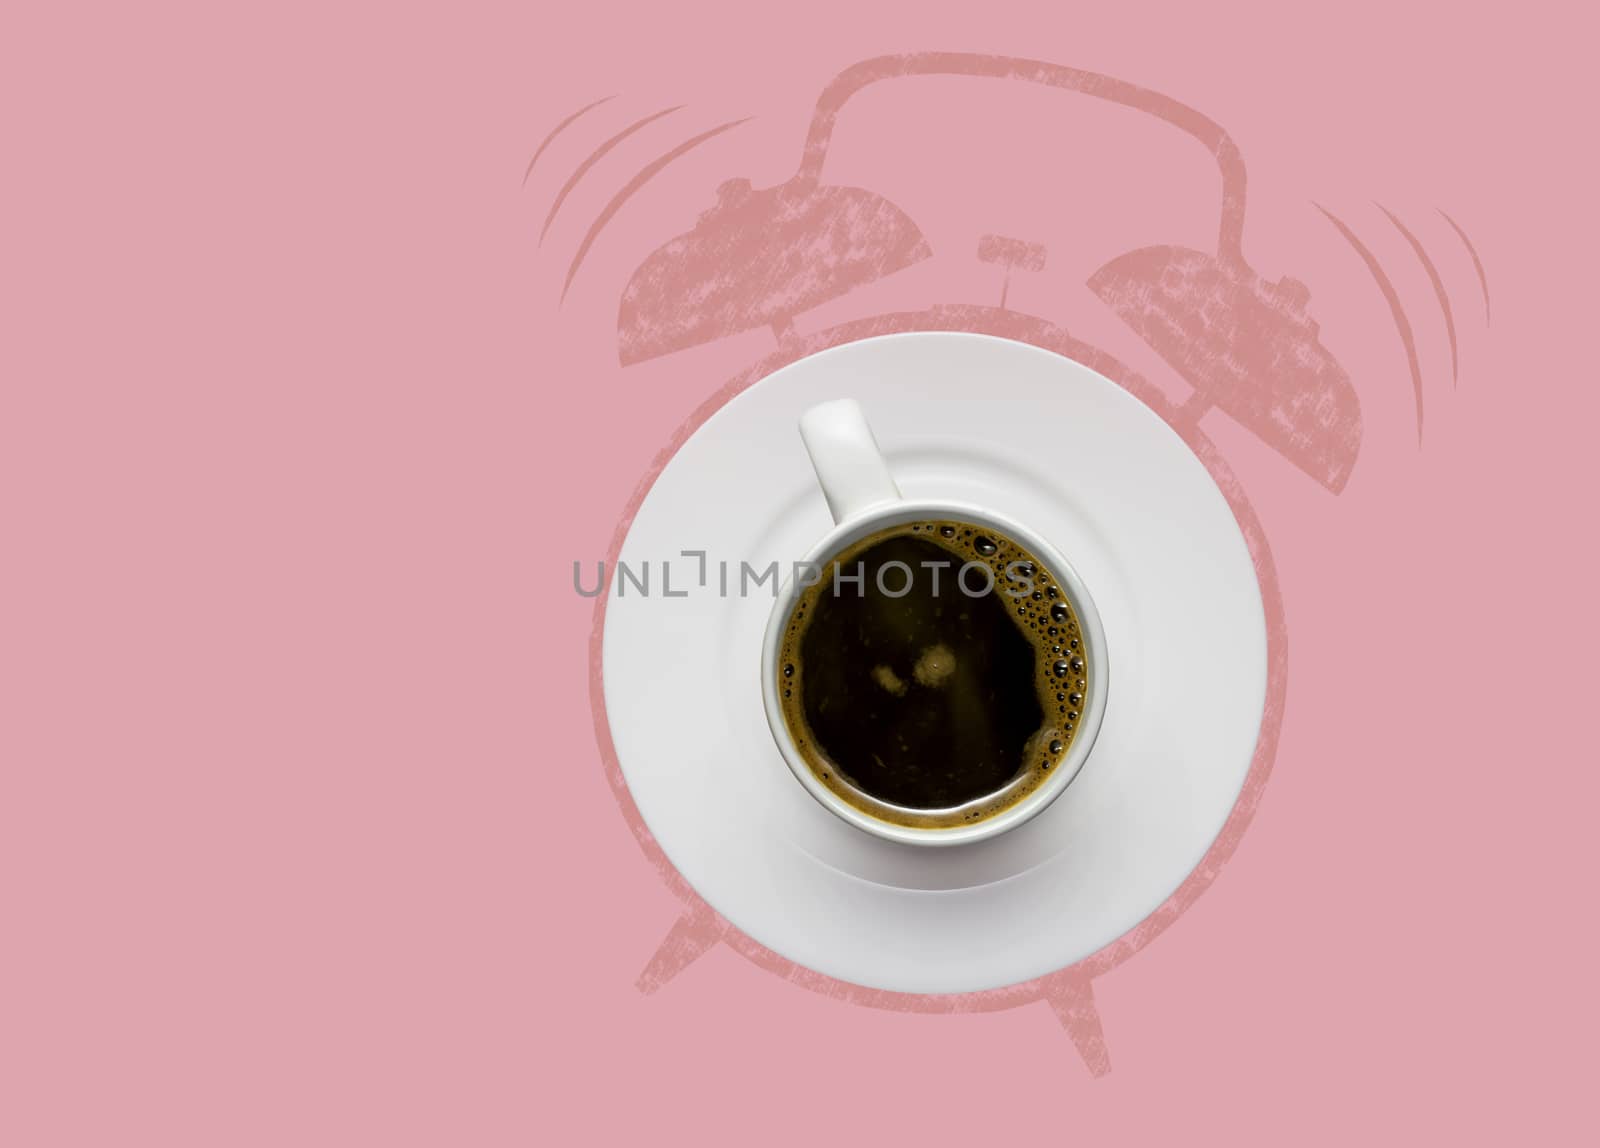 Creative concept photo of a coffee cup on a plate and illustrated alarm clock on pink background.